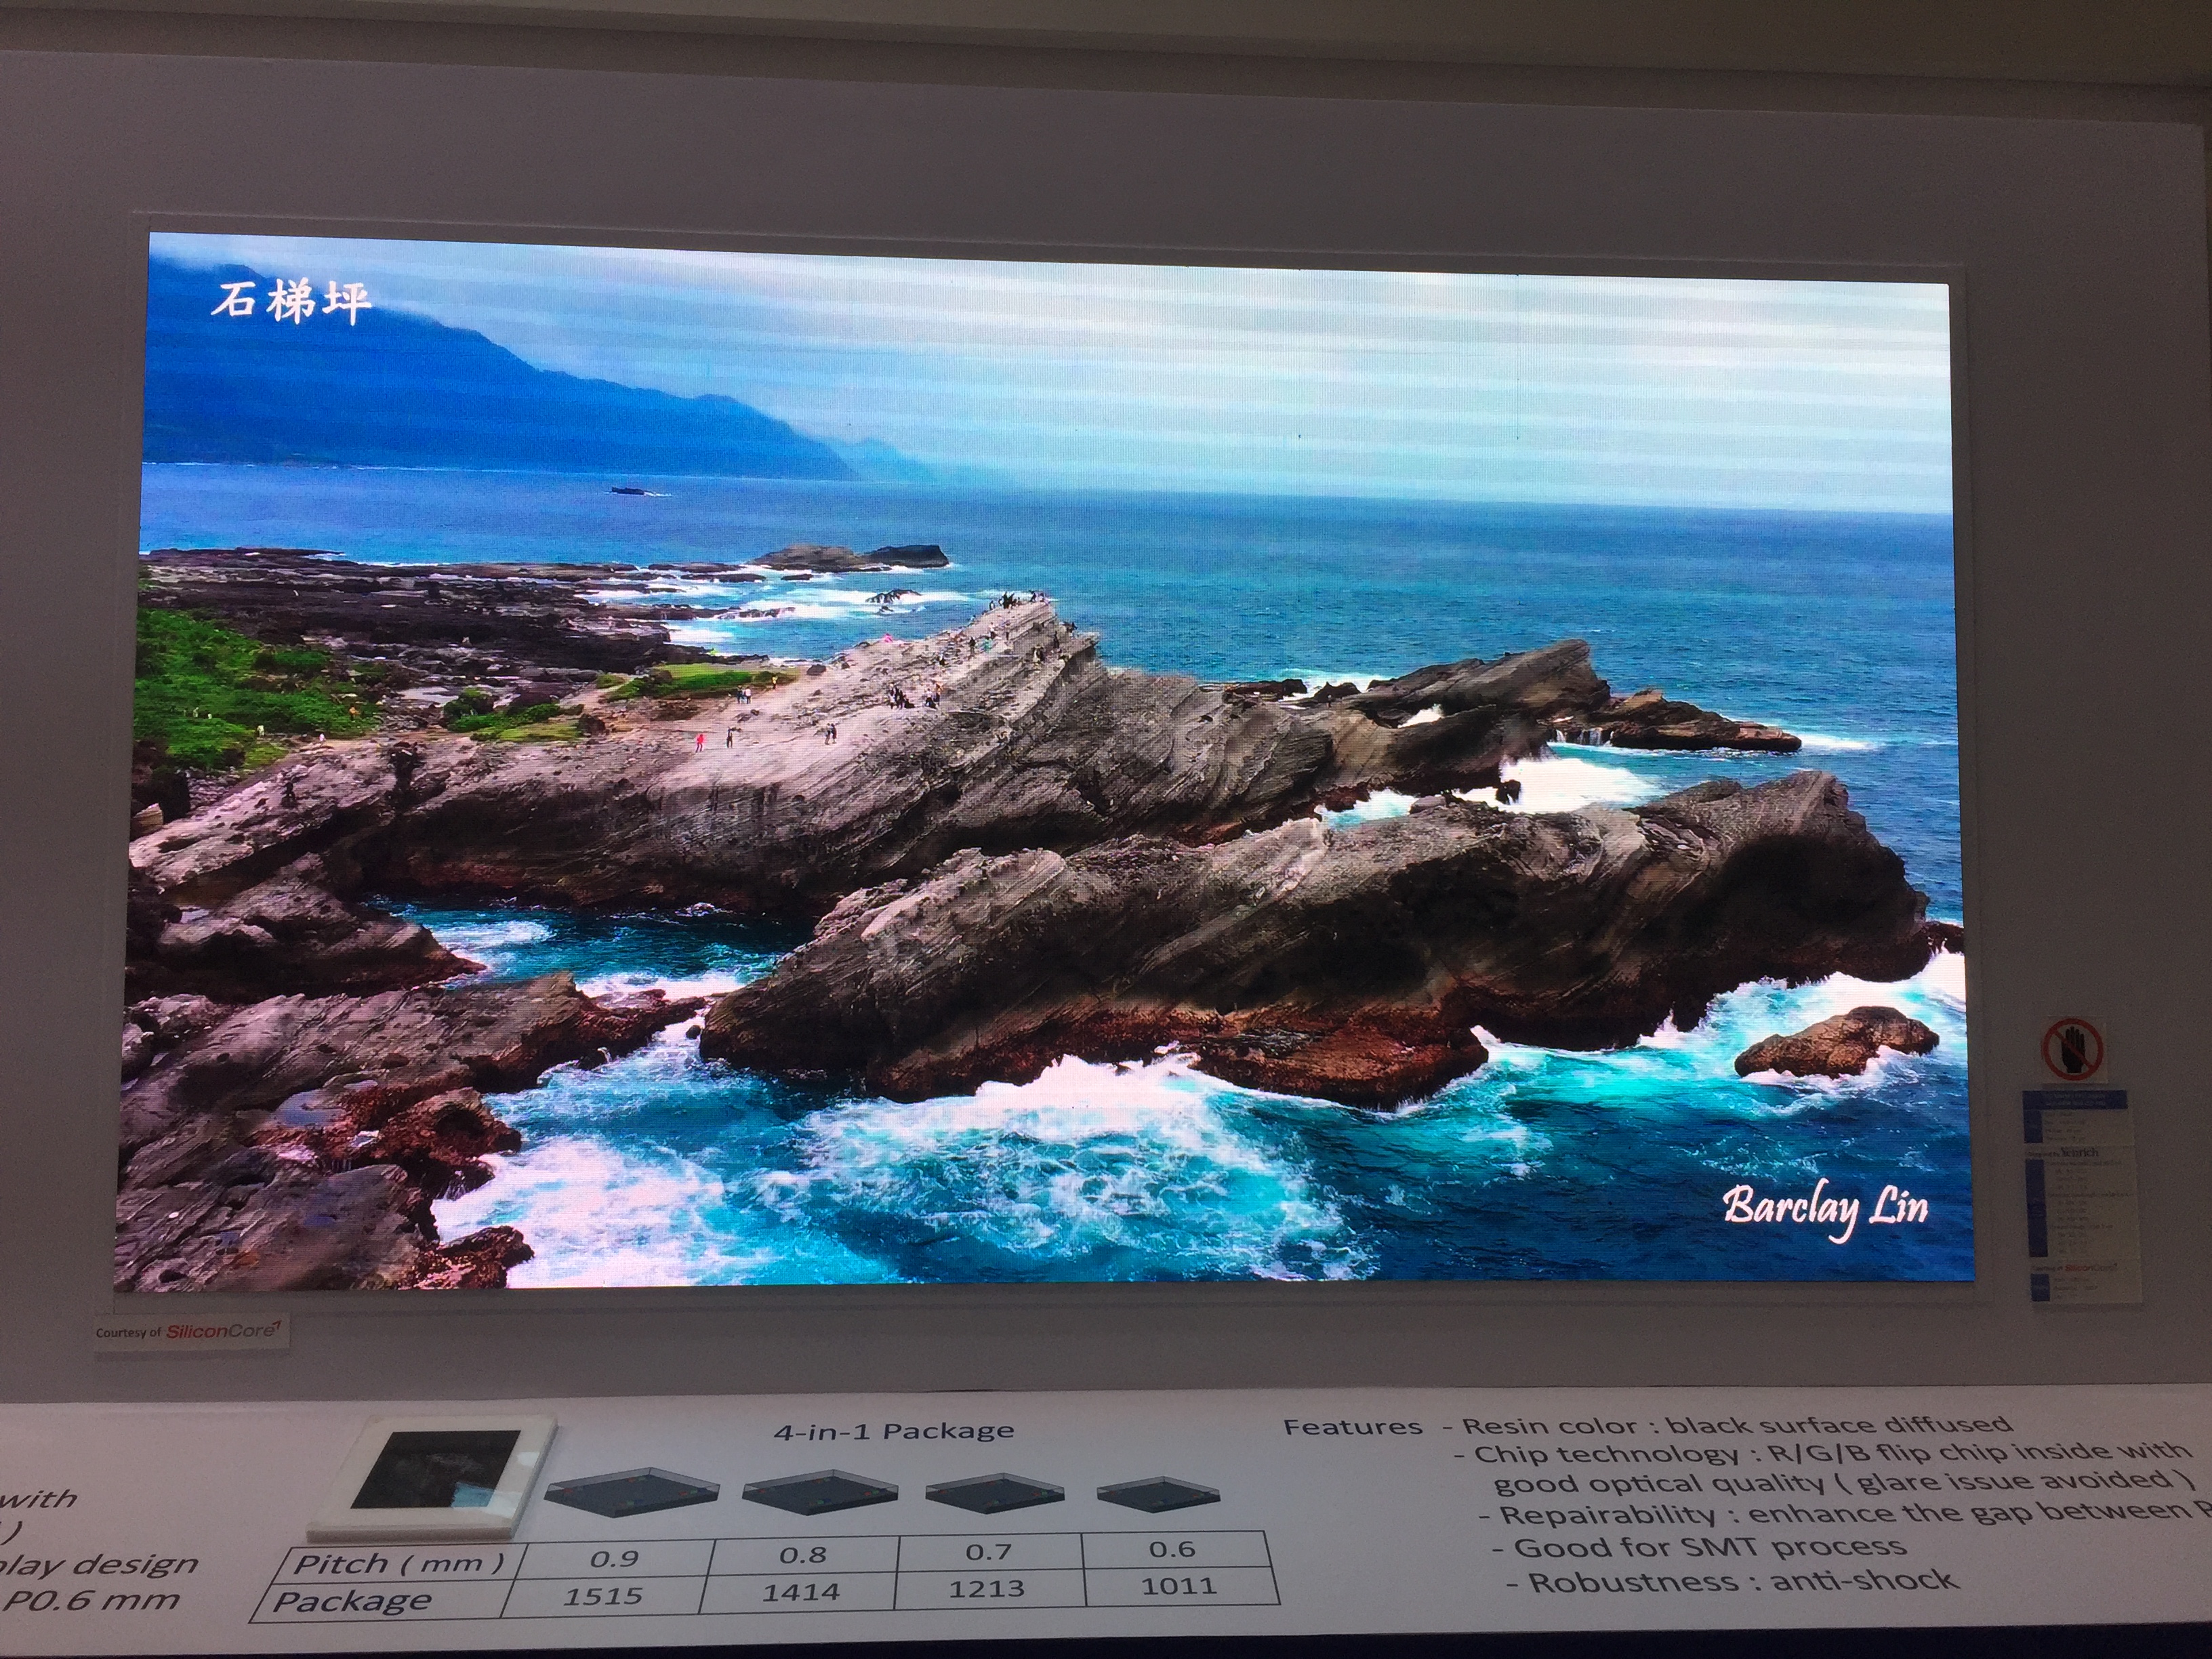 Toray Develop MicroLED Display Materials -Contributing to Total Mass  Production Solution by Offering Materials and Equipment- - LEDinside